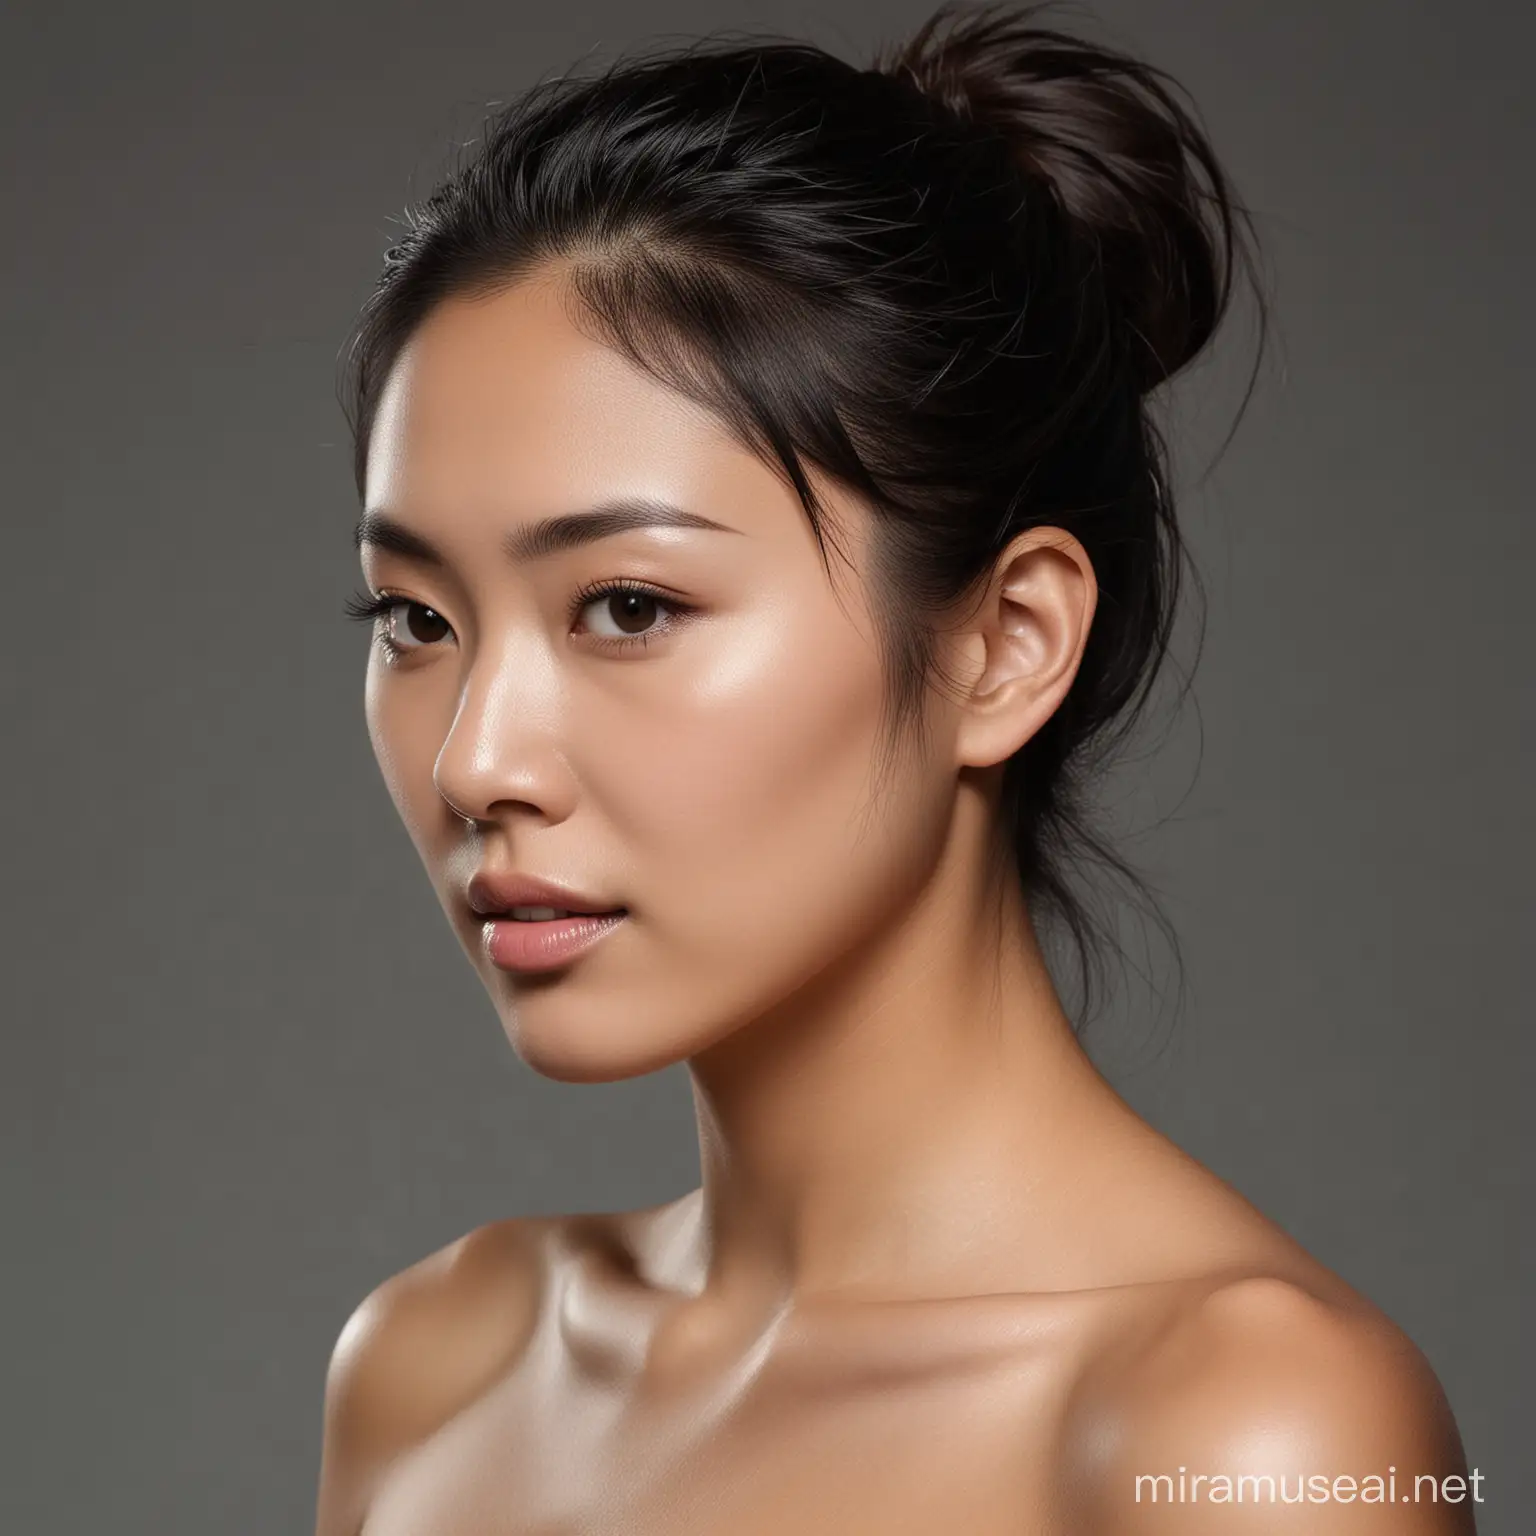 Asian Woman with Dark Hair in Natural Profile Portrait